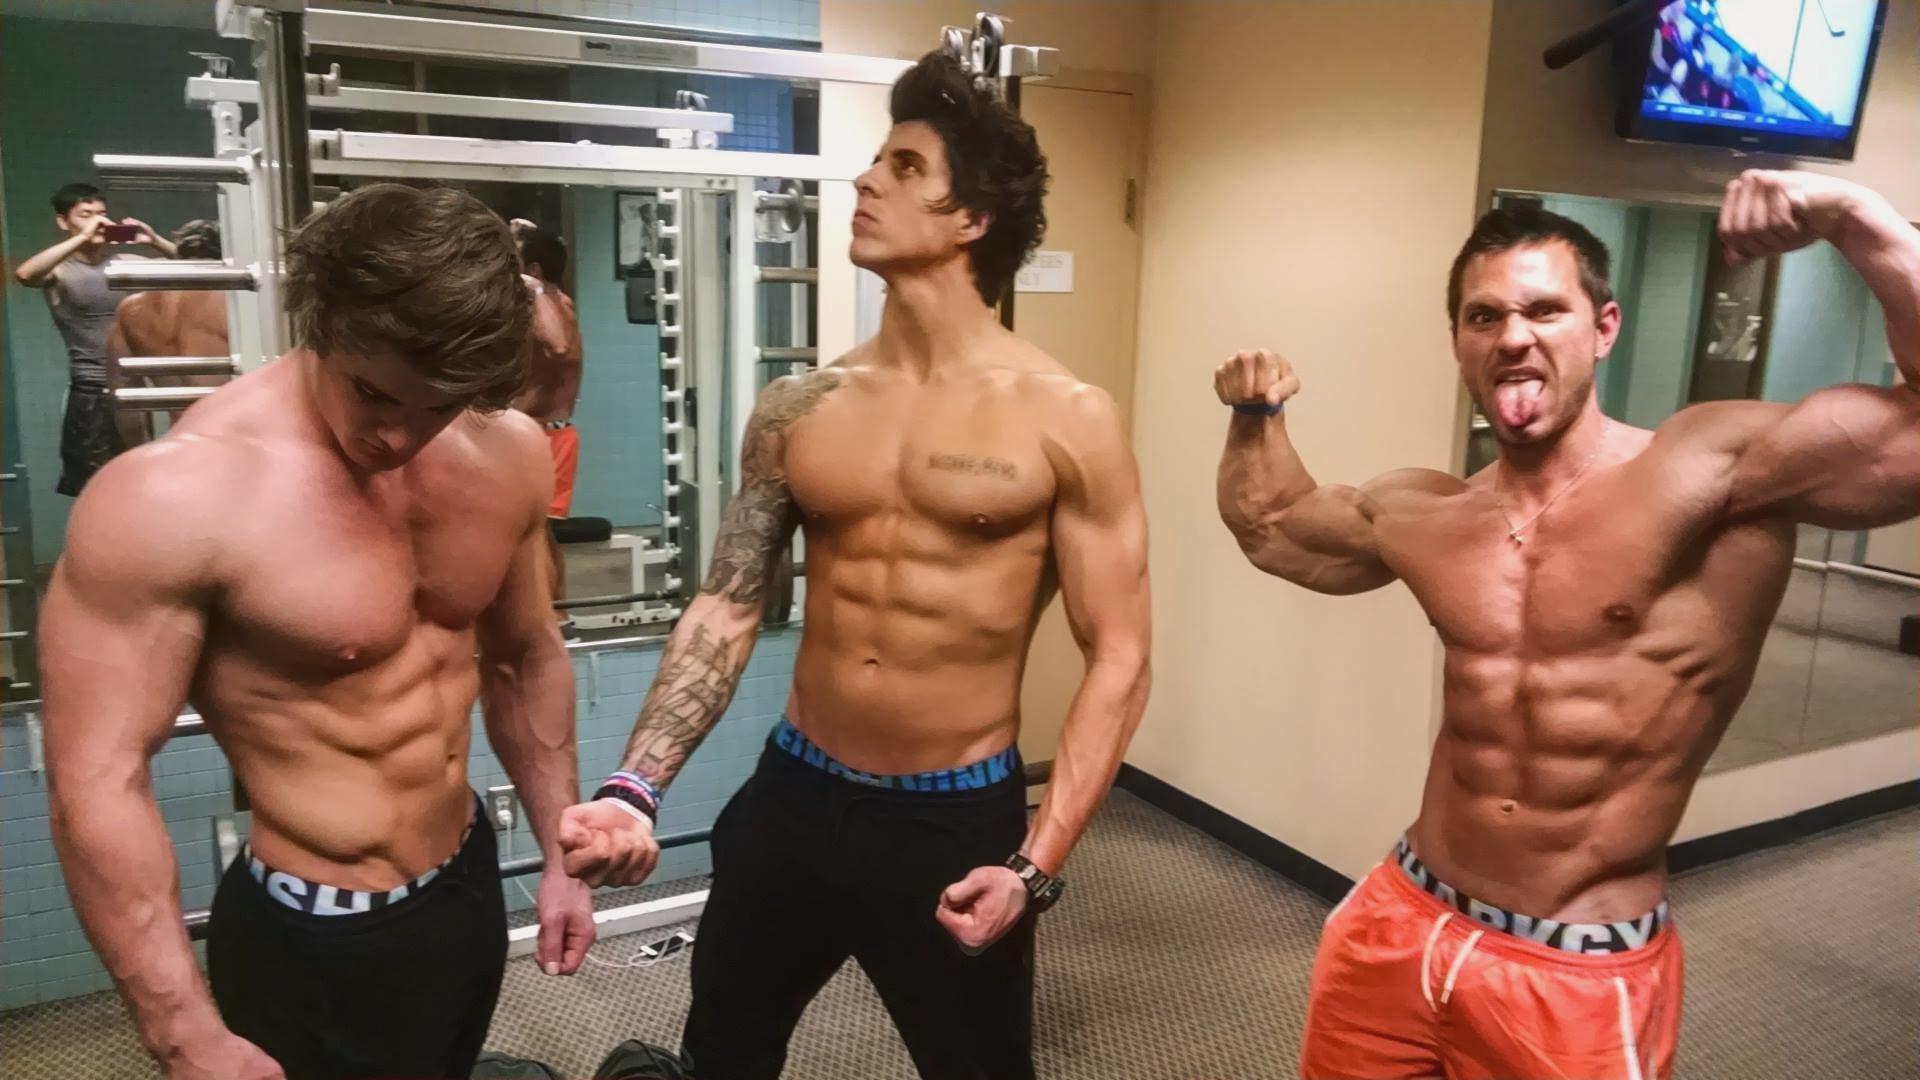 jeff seid hd wallpapers,bodybuilding,bodybuilder,barechested,muscle,physical fitness